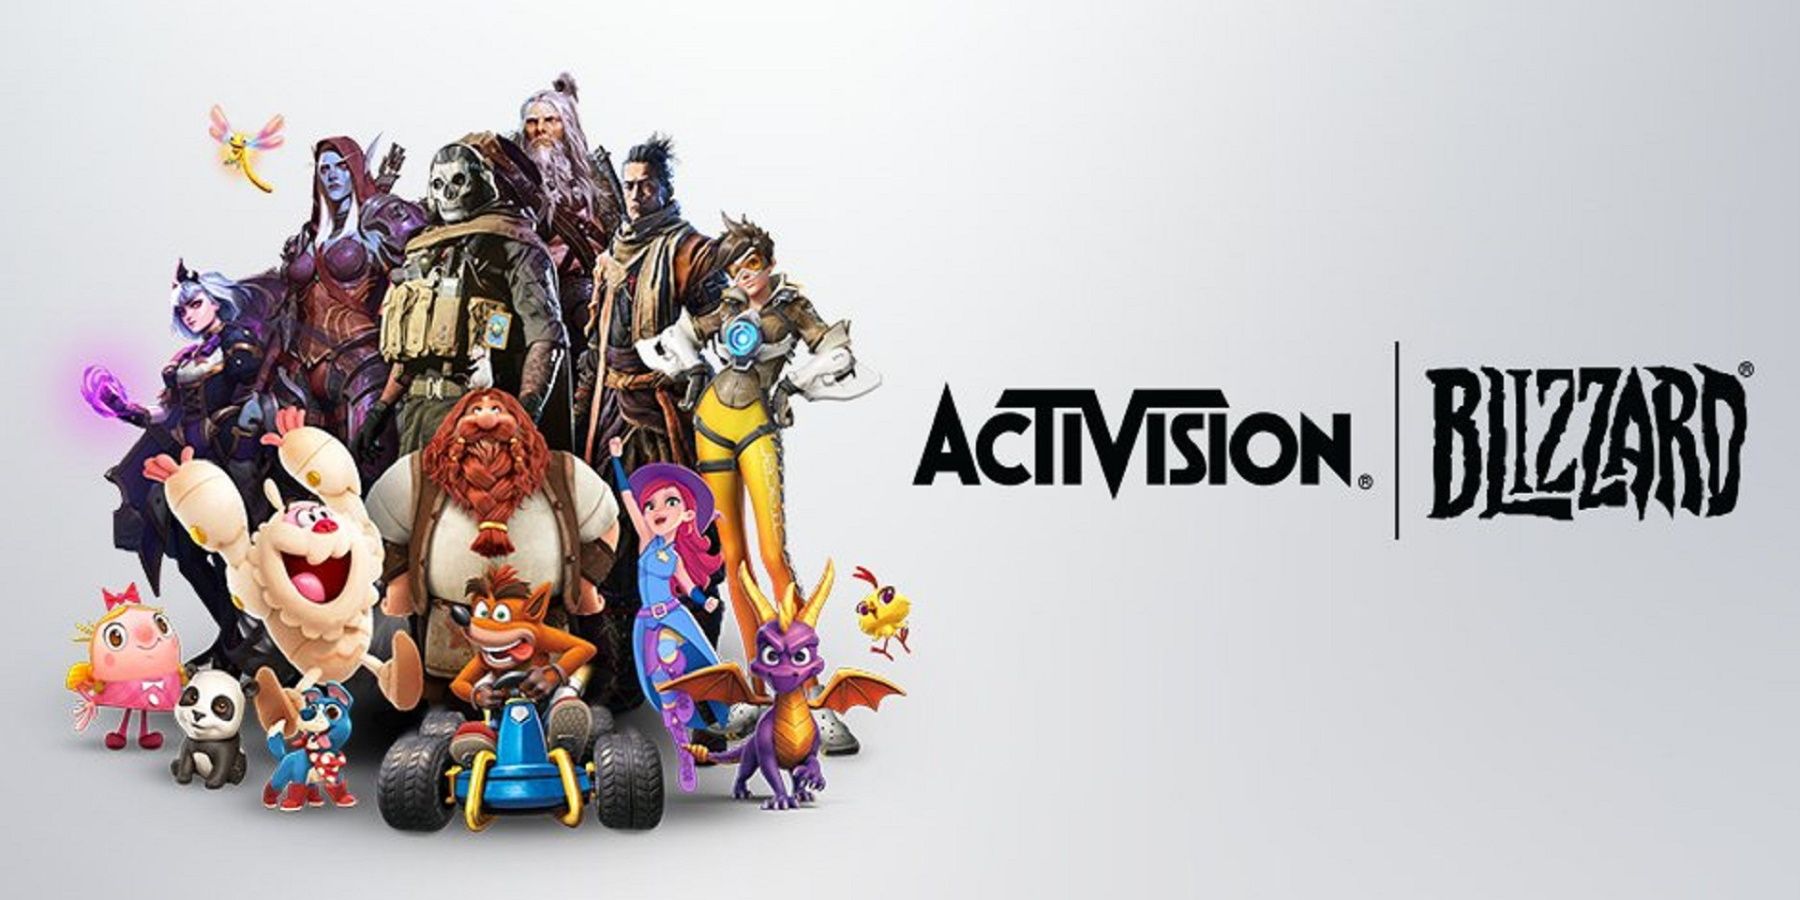 activision-blizzard-purchase-microsoft-approval-serbia